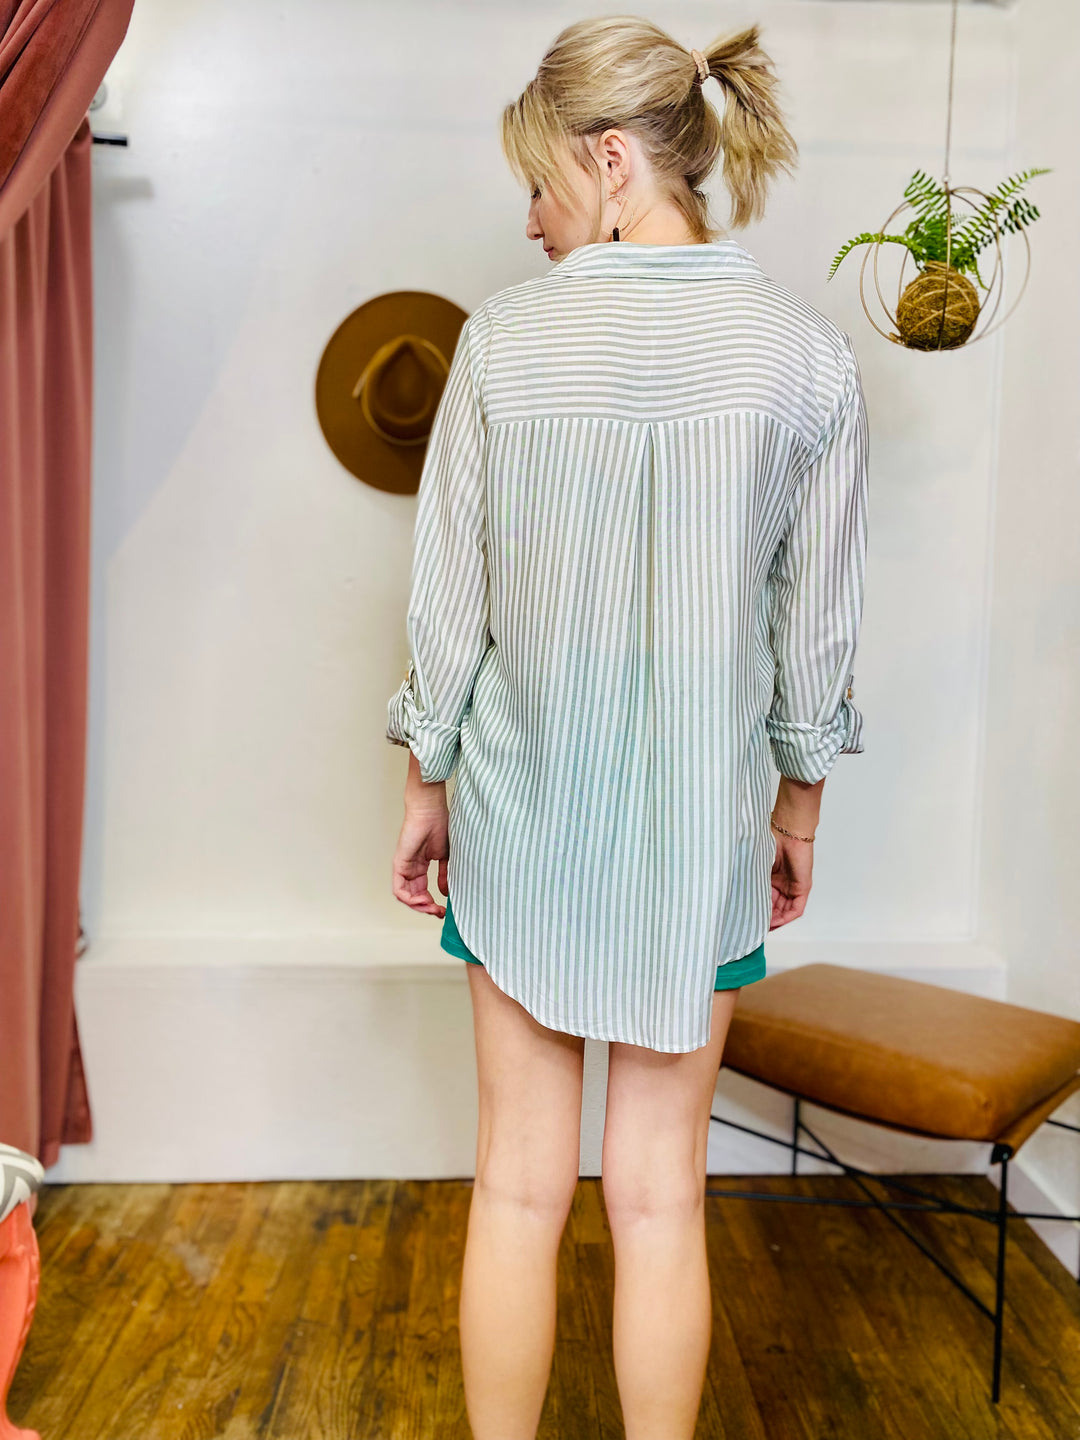 Betty Striped Button Up Long Sleeve Blouse-Tops-Anatomy Clothing Boutique in Brenham, Texas